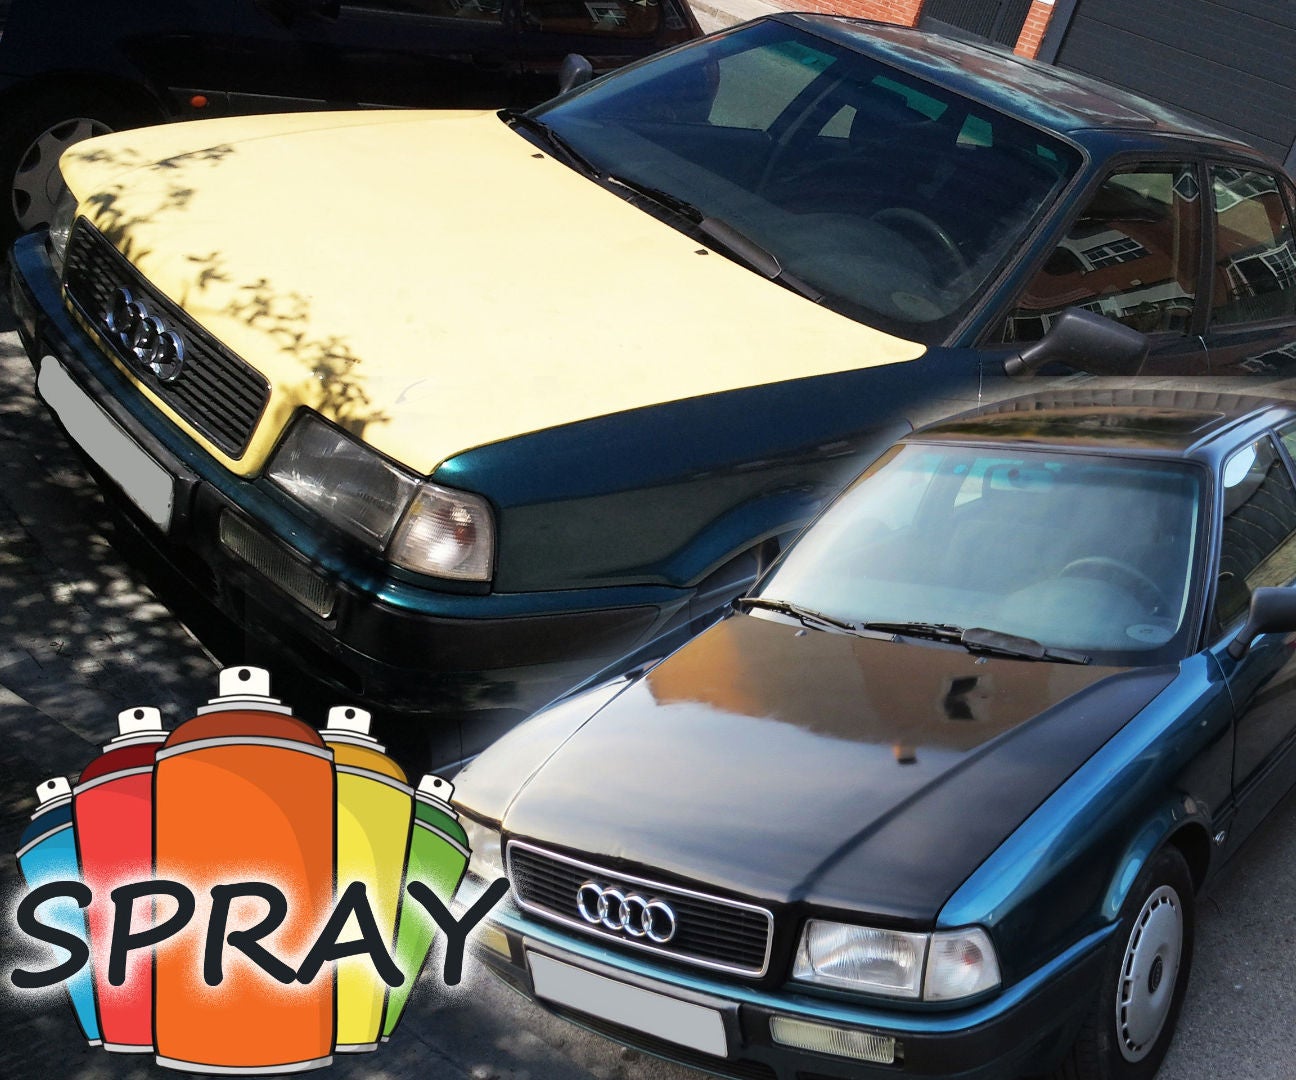 How to Paint a Car With Spray in the Street - 50$ Paint Job